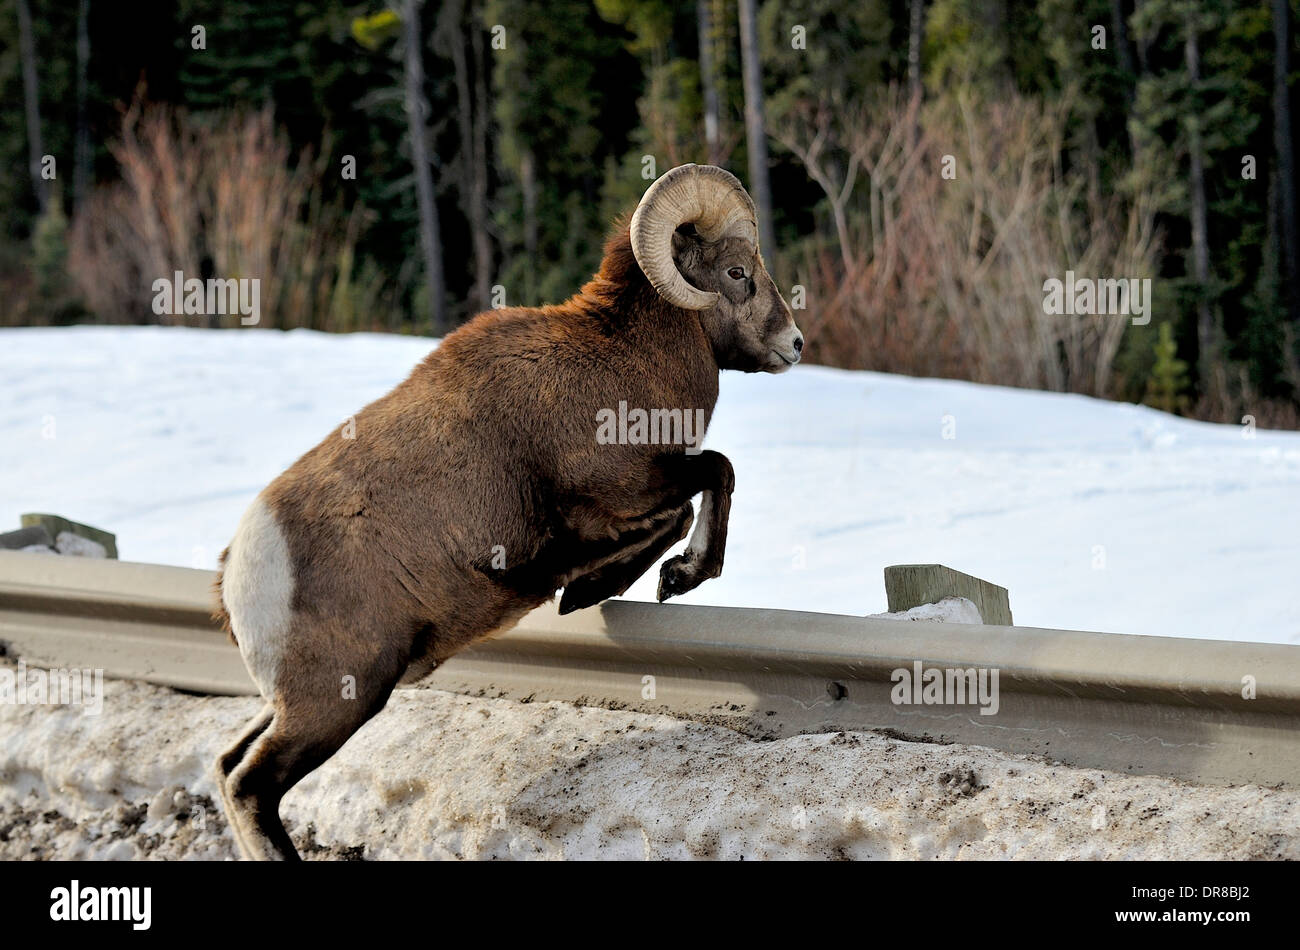 A mature bighorn sheep jumping over the steel guard rail on the side of the road Stock Photo